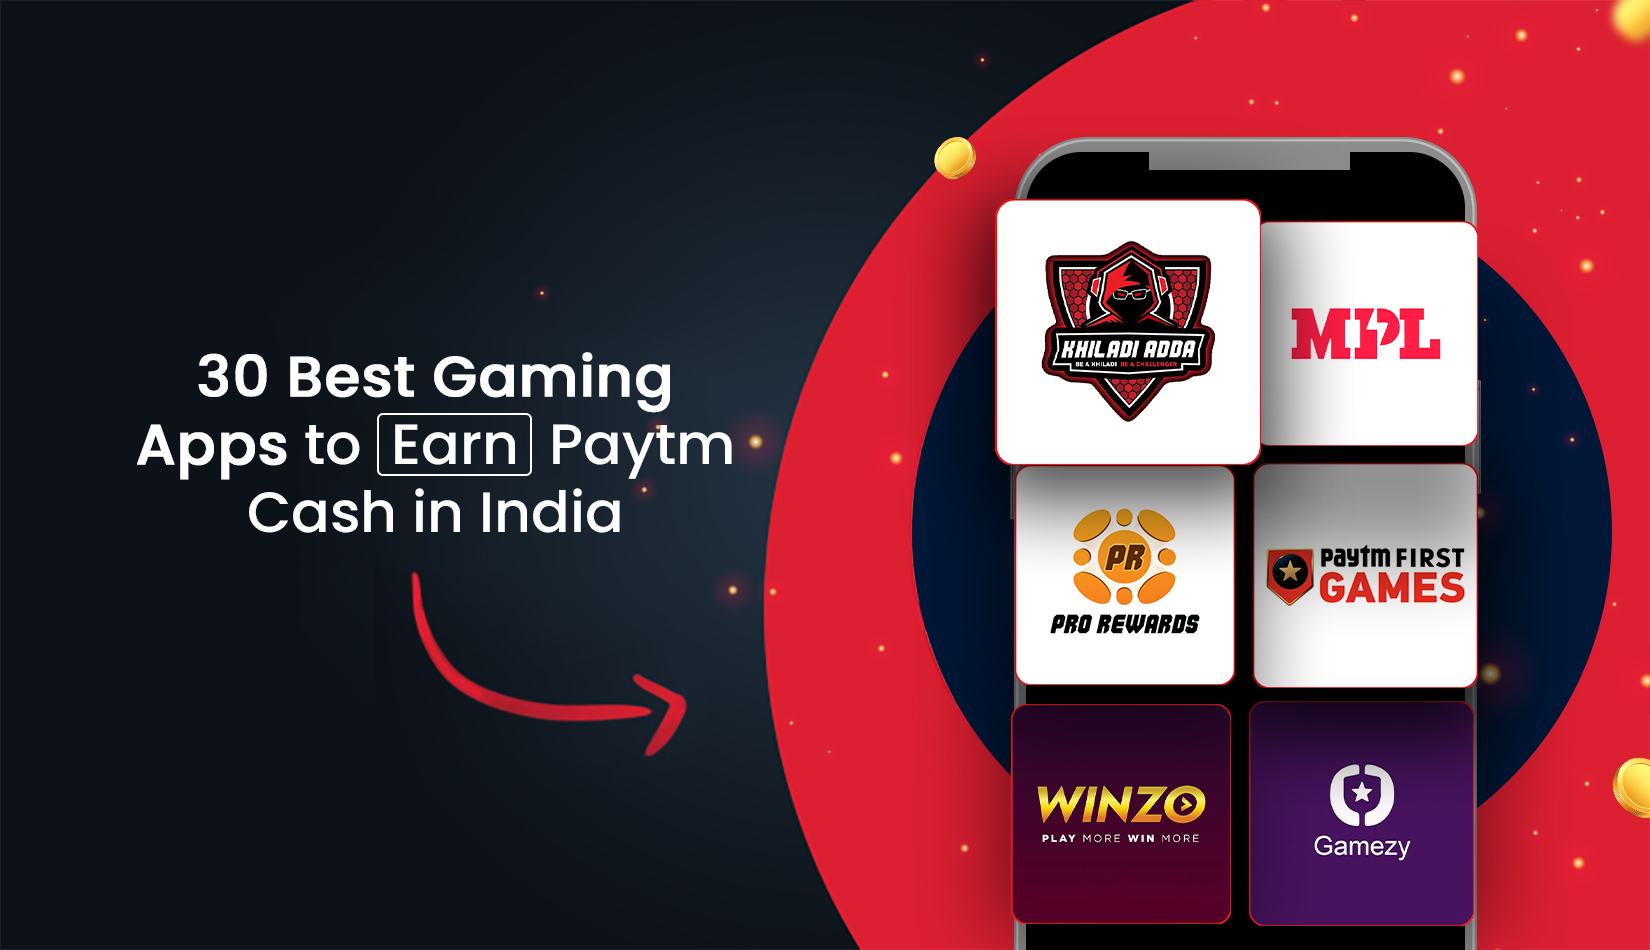 30 Best Gaming Apps to Earn Paytm Cash in India